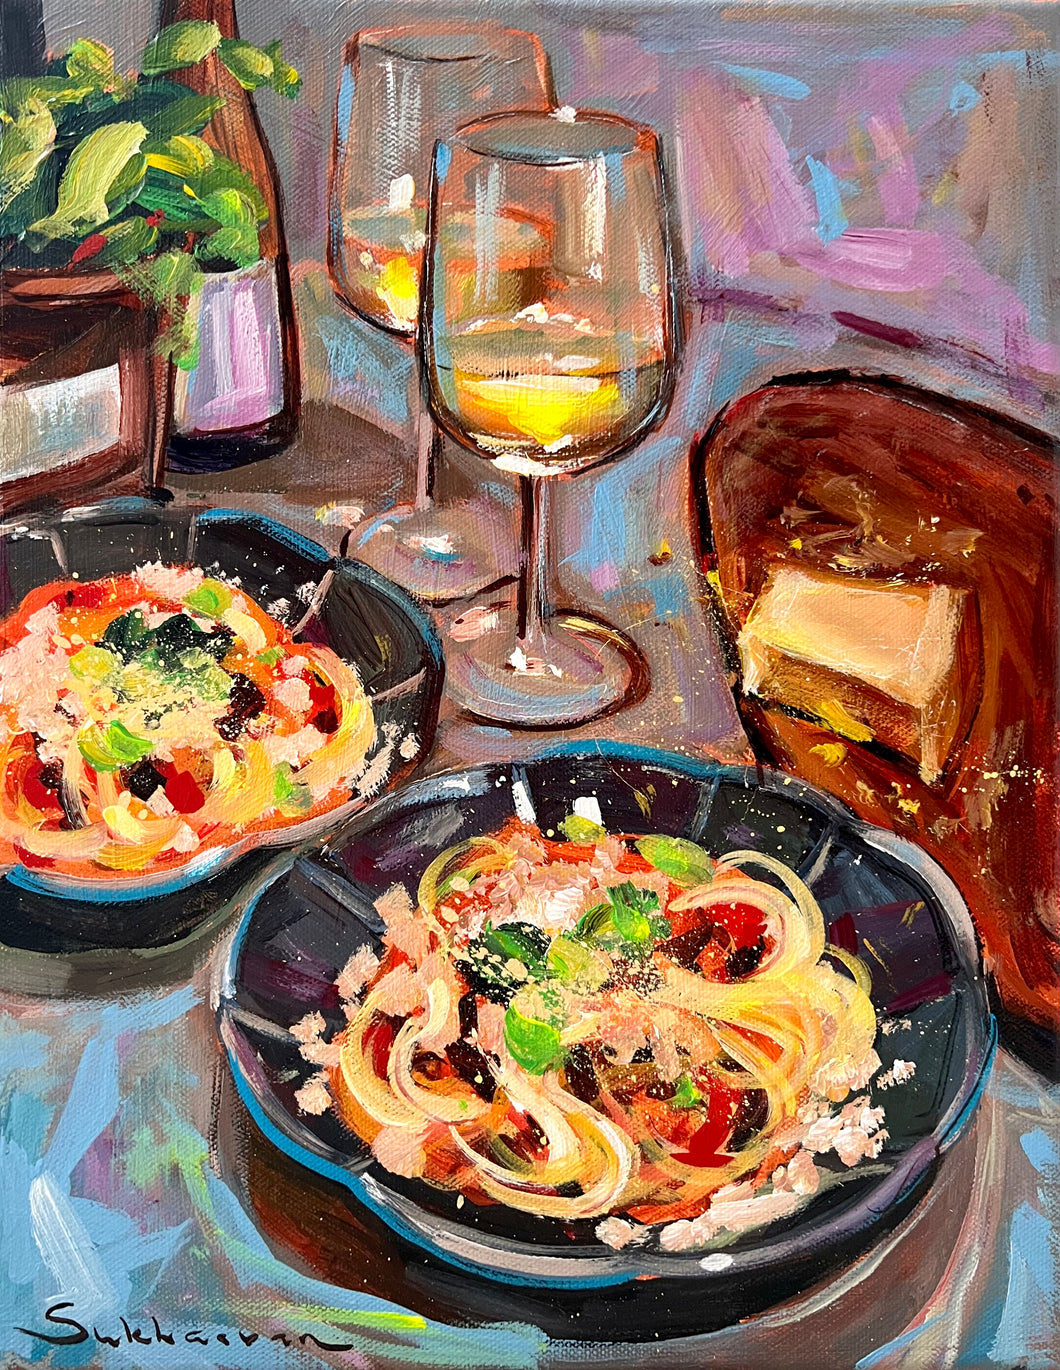 Archival giclée print of the of Original acrylic painting Still Life with Spaghetti and White Wine by Victoria Sukhasyan.